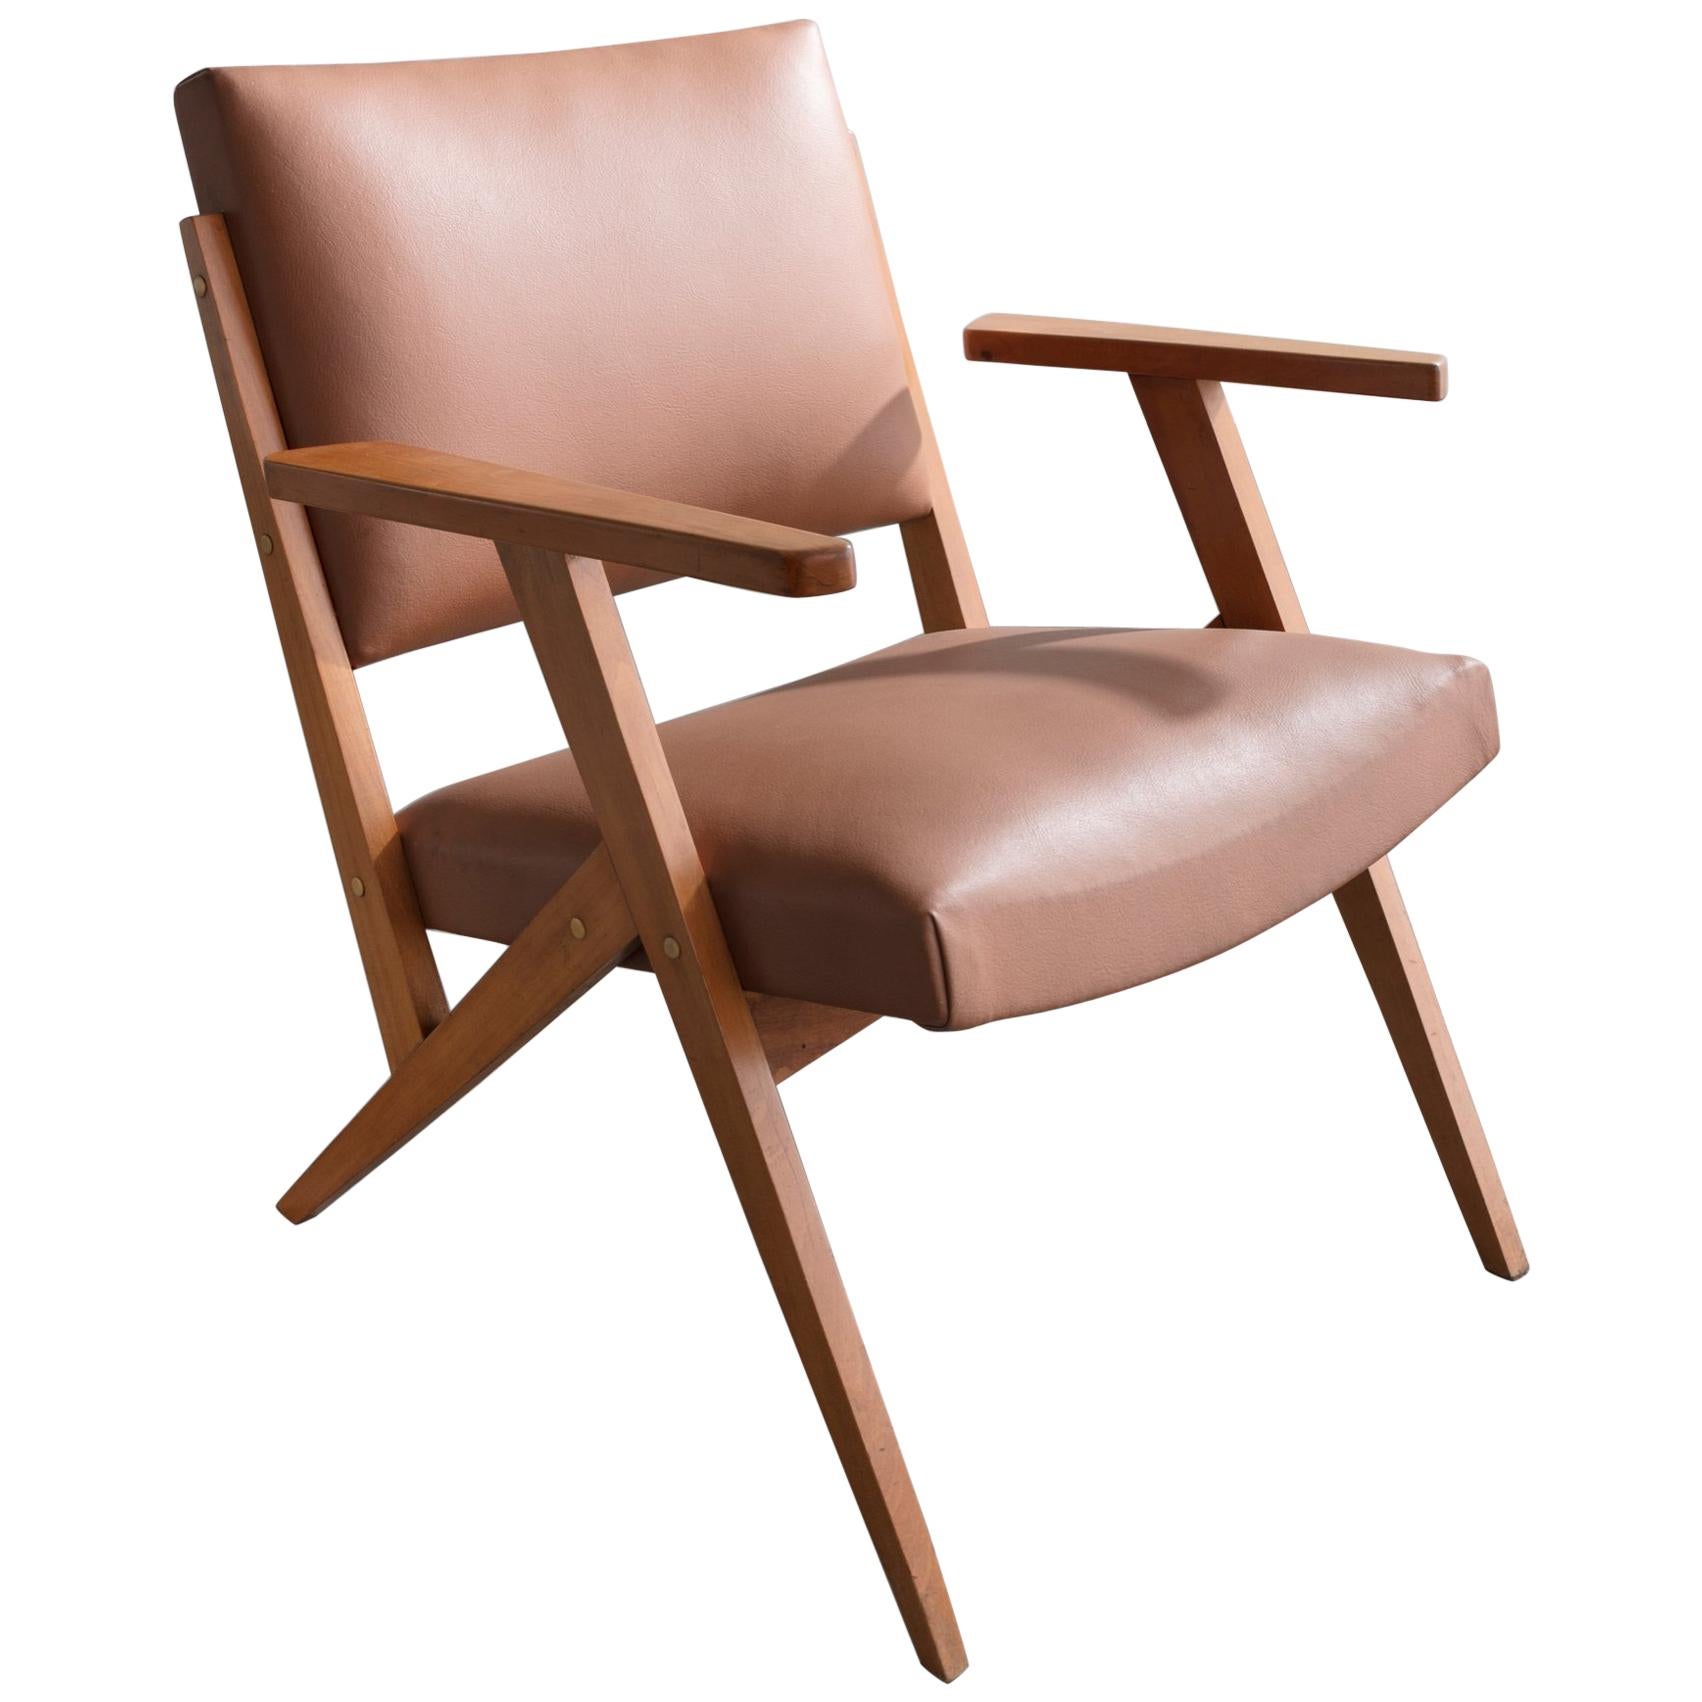 Lounge Chair in Caviona Wood and Tan Leather by José Zanine Caldas, 1960s For Sale